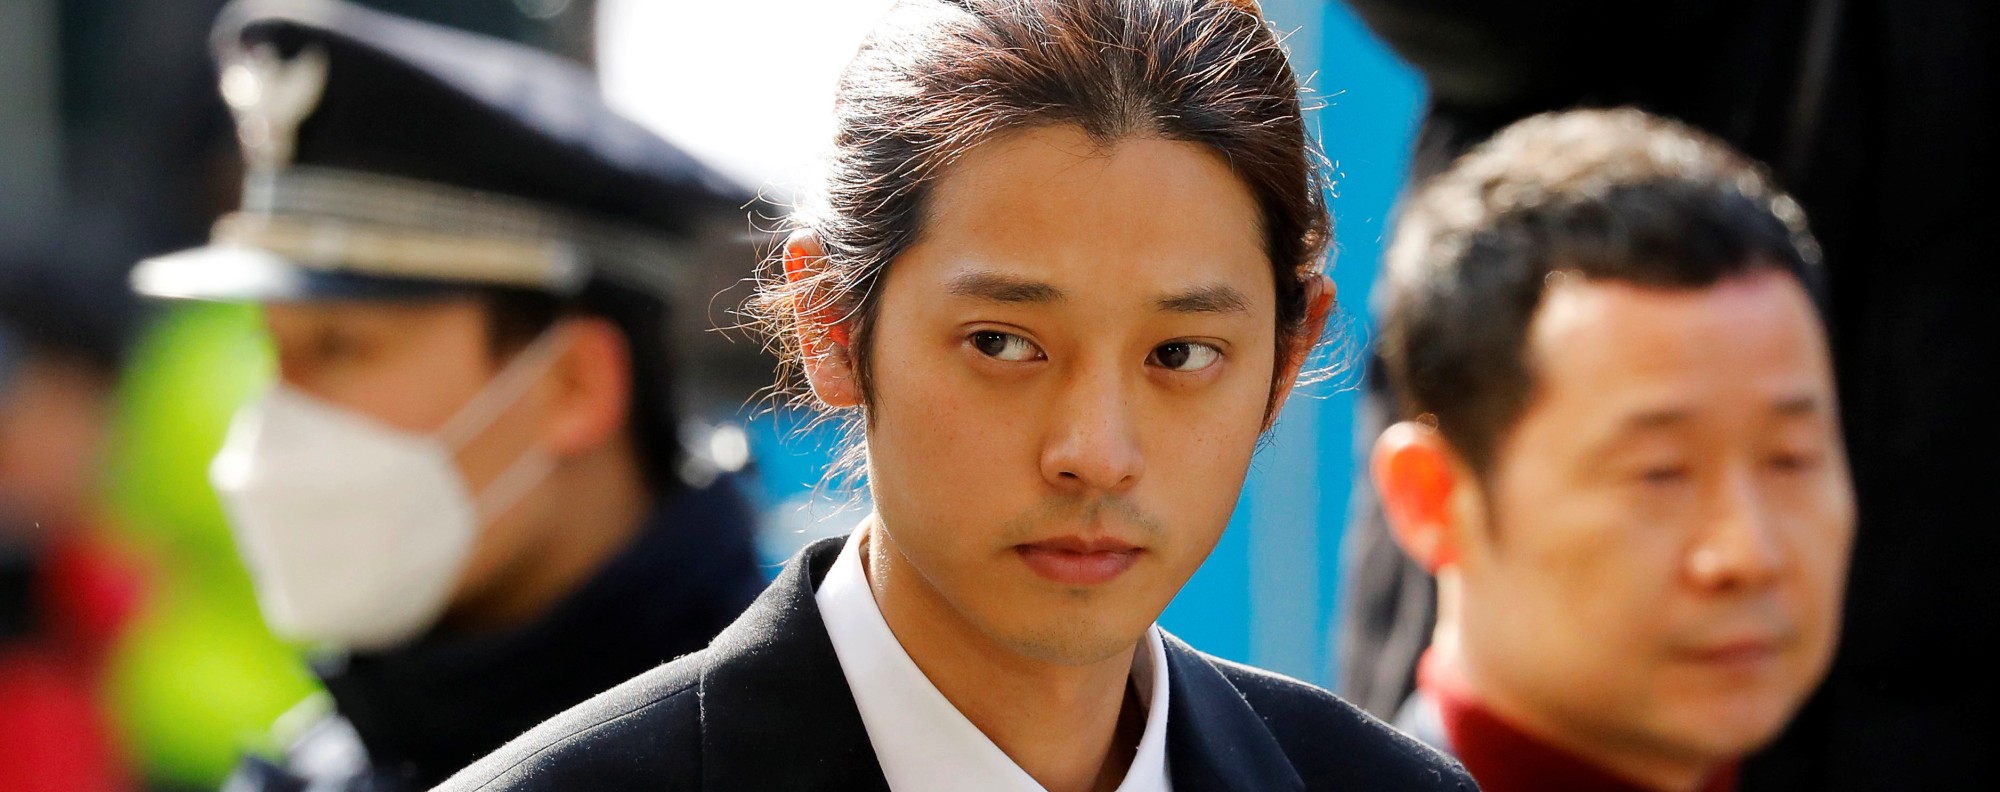 Asian Facial Abuse Forced - K-pop sex scandal: Jung Joon-young and Choi Jong-hoon jailed for gang rape  | South China Morning Post